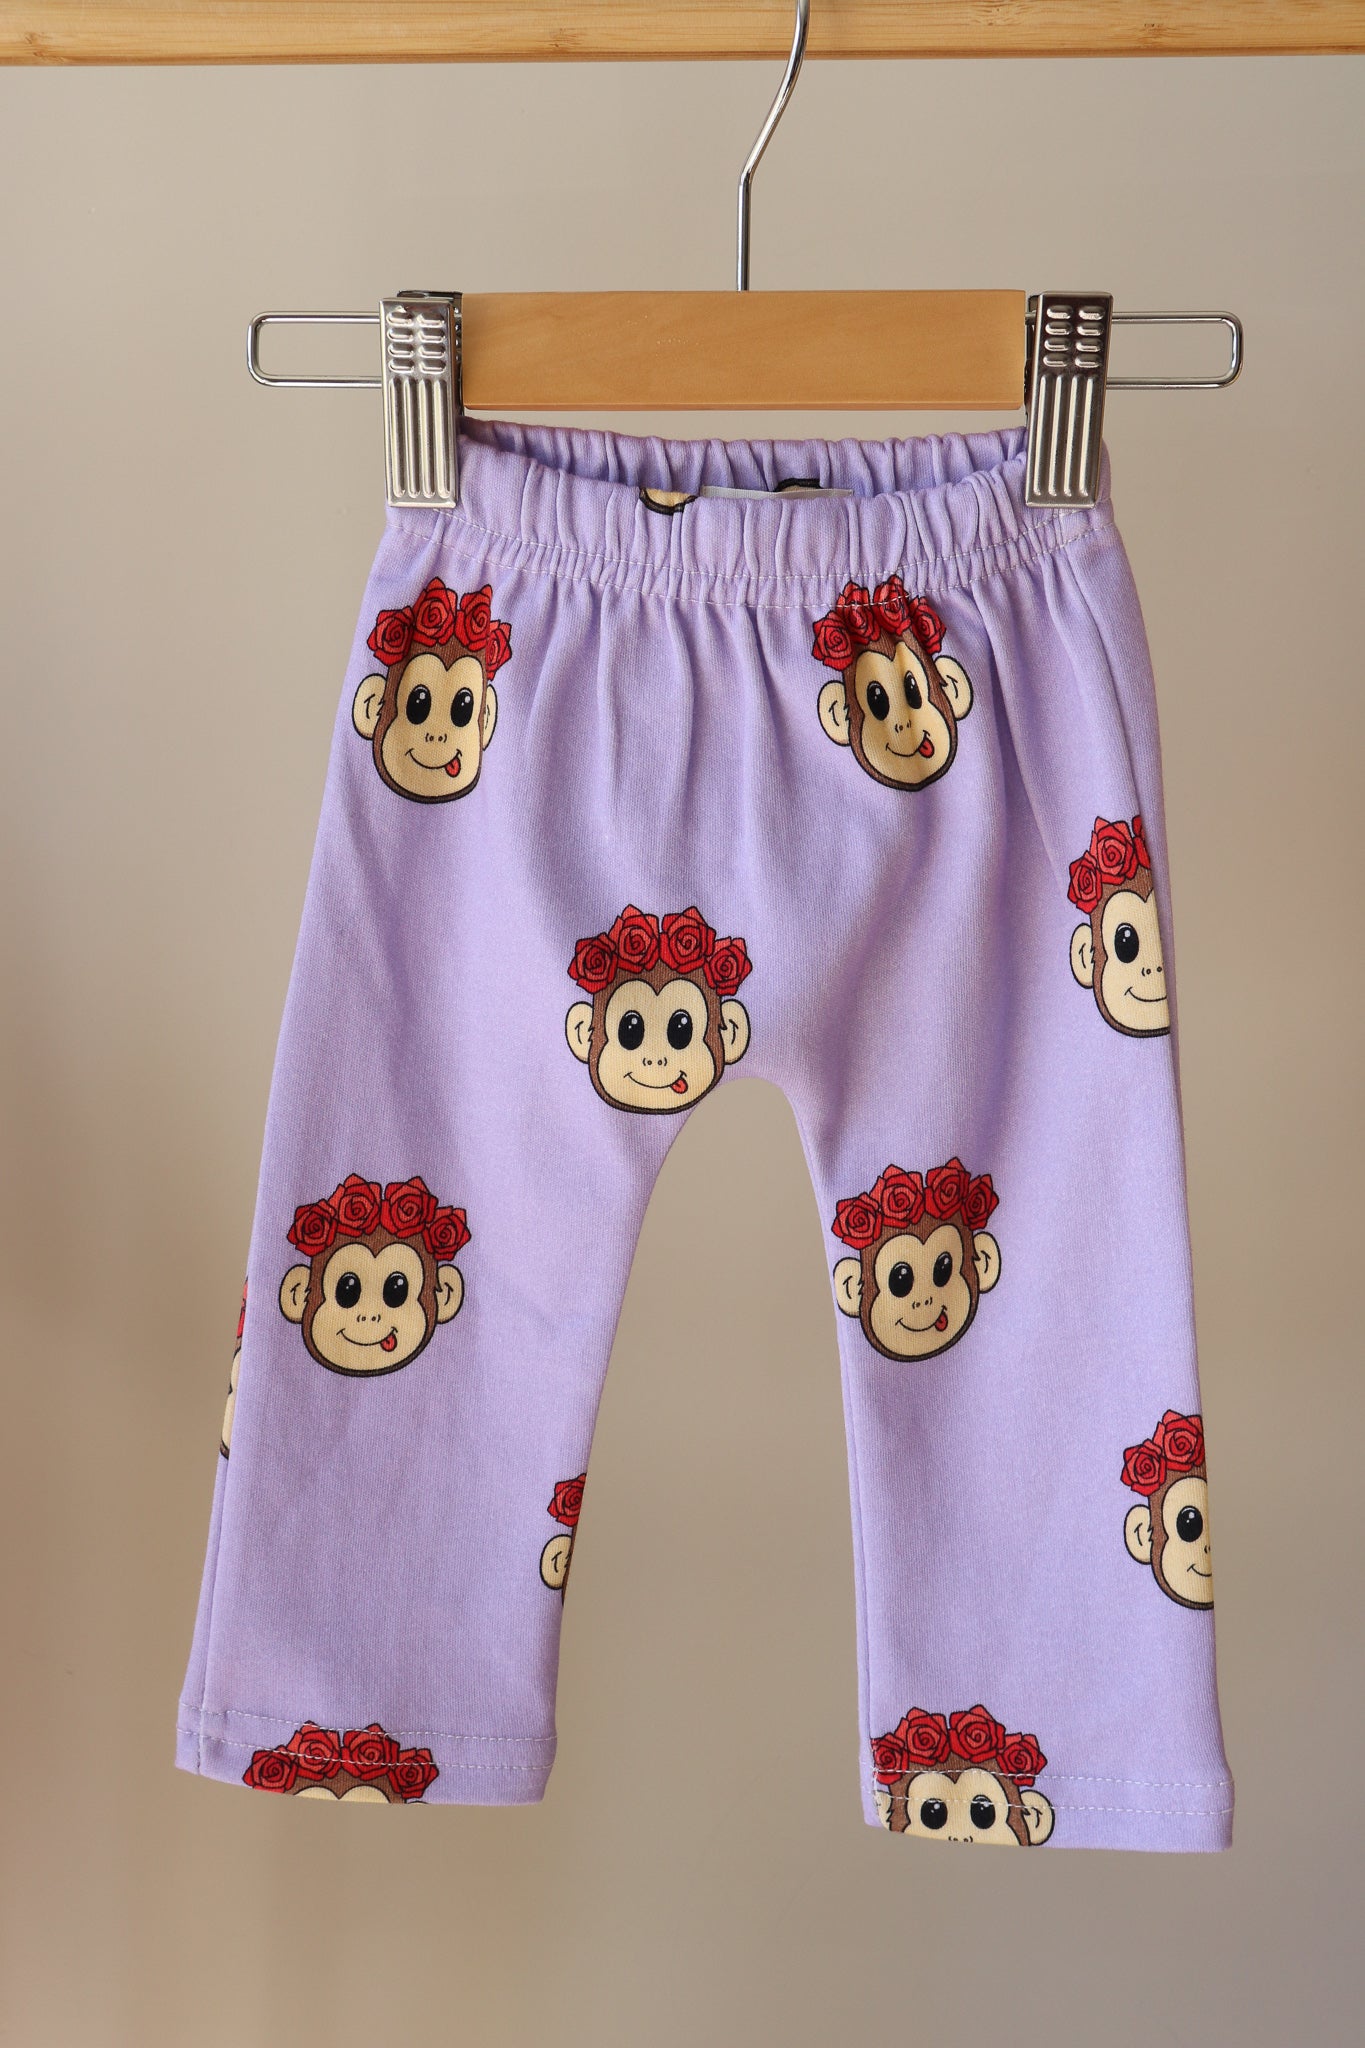 purple baby pants with a cute monkey design printed all over